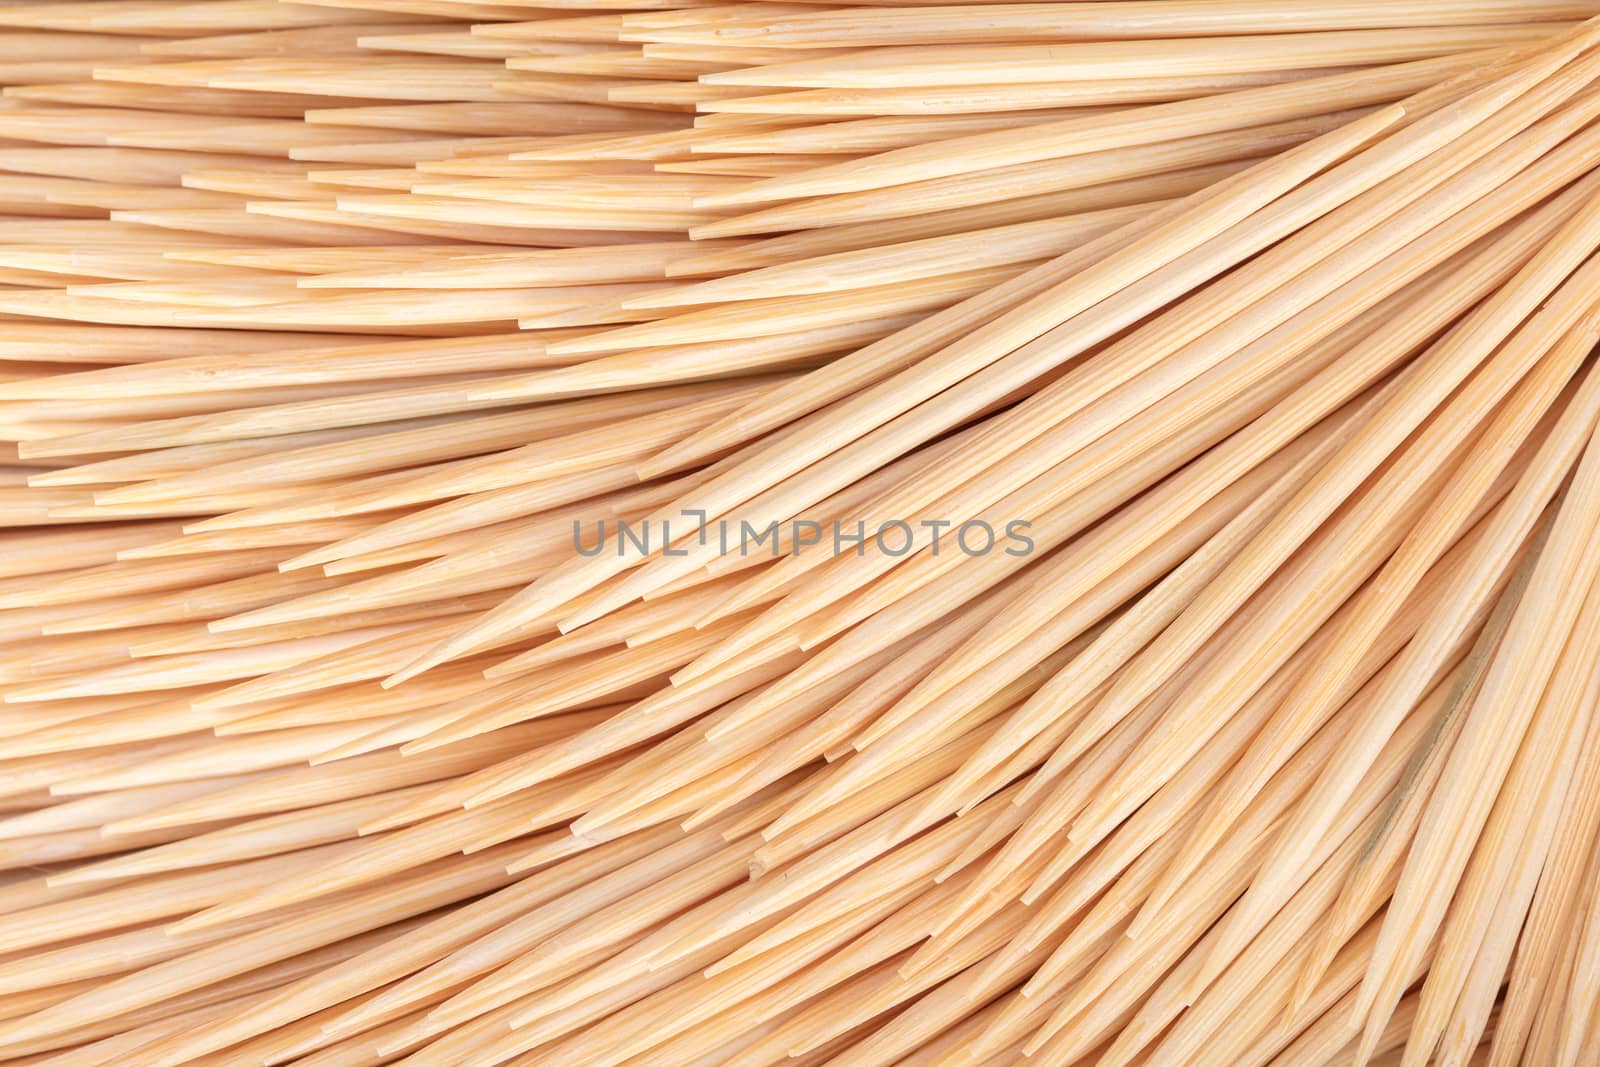 abstract background of wooden toothpicks close-up